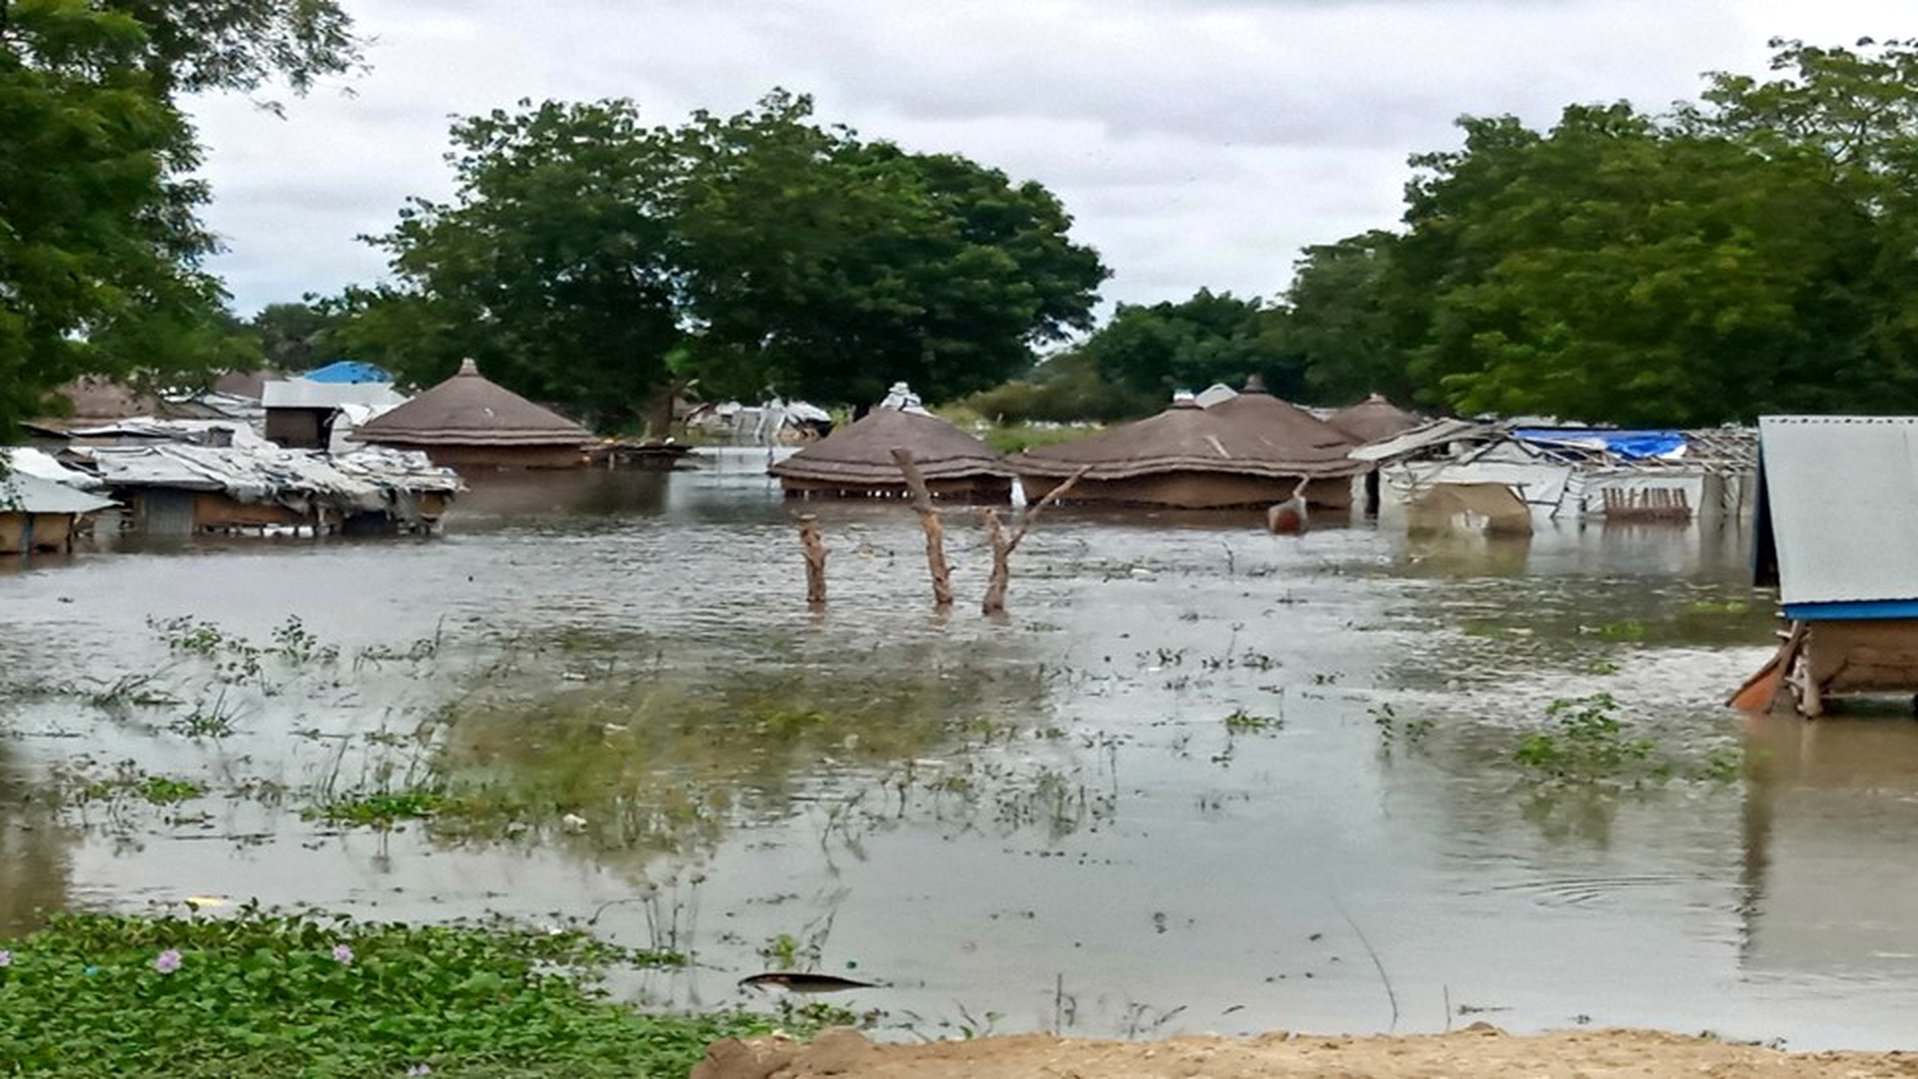 Homes in floods in Hai Machour, Anyidi payam, Bor South County.